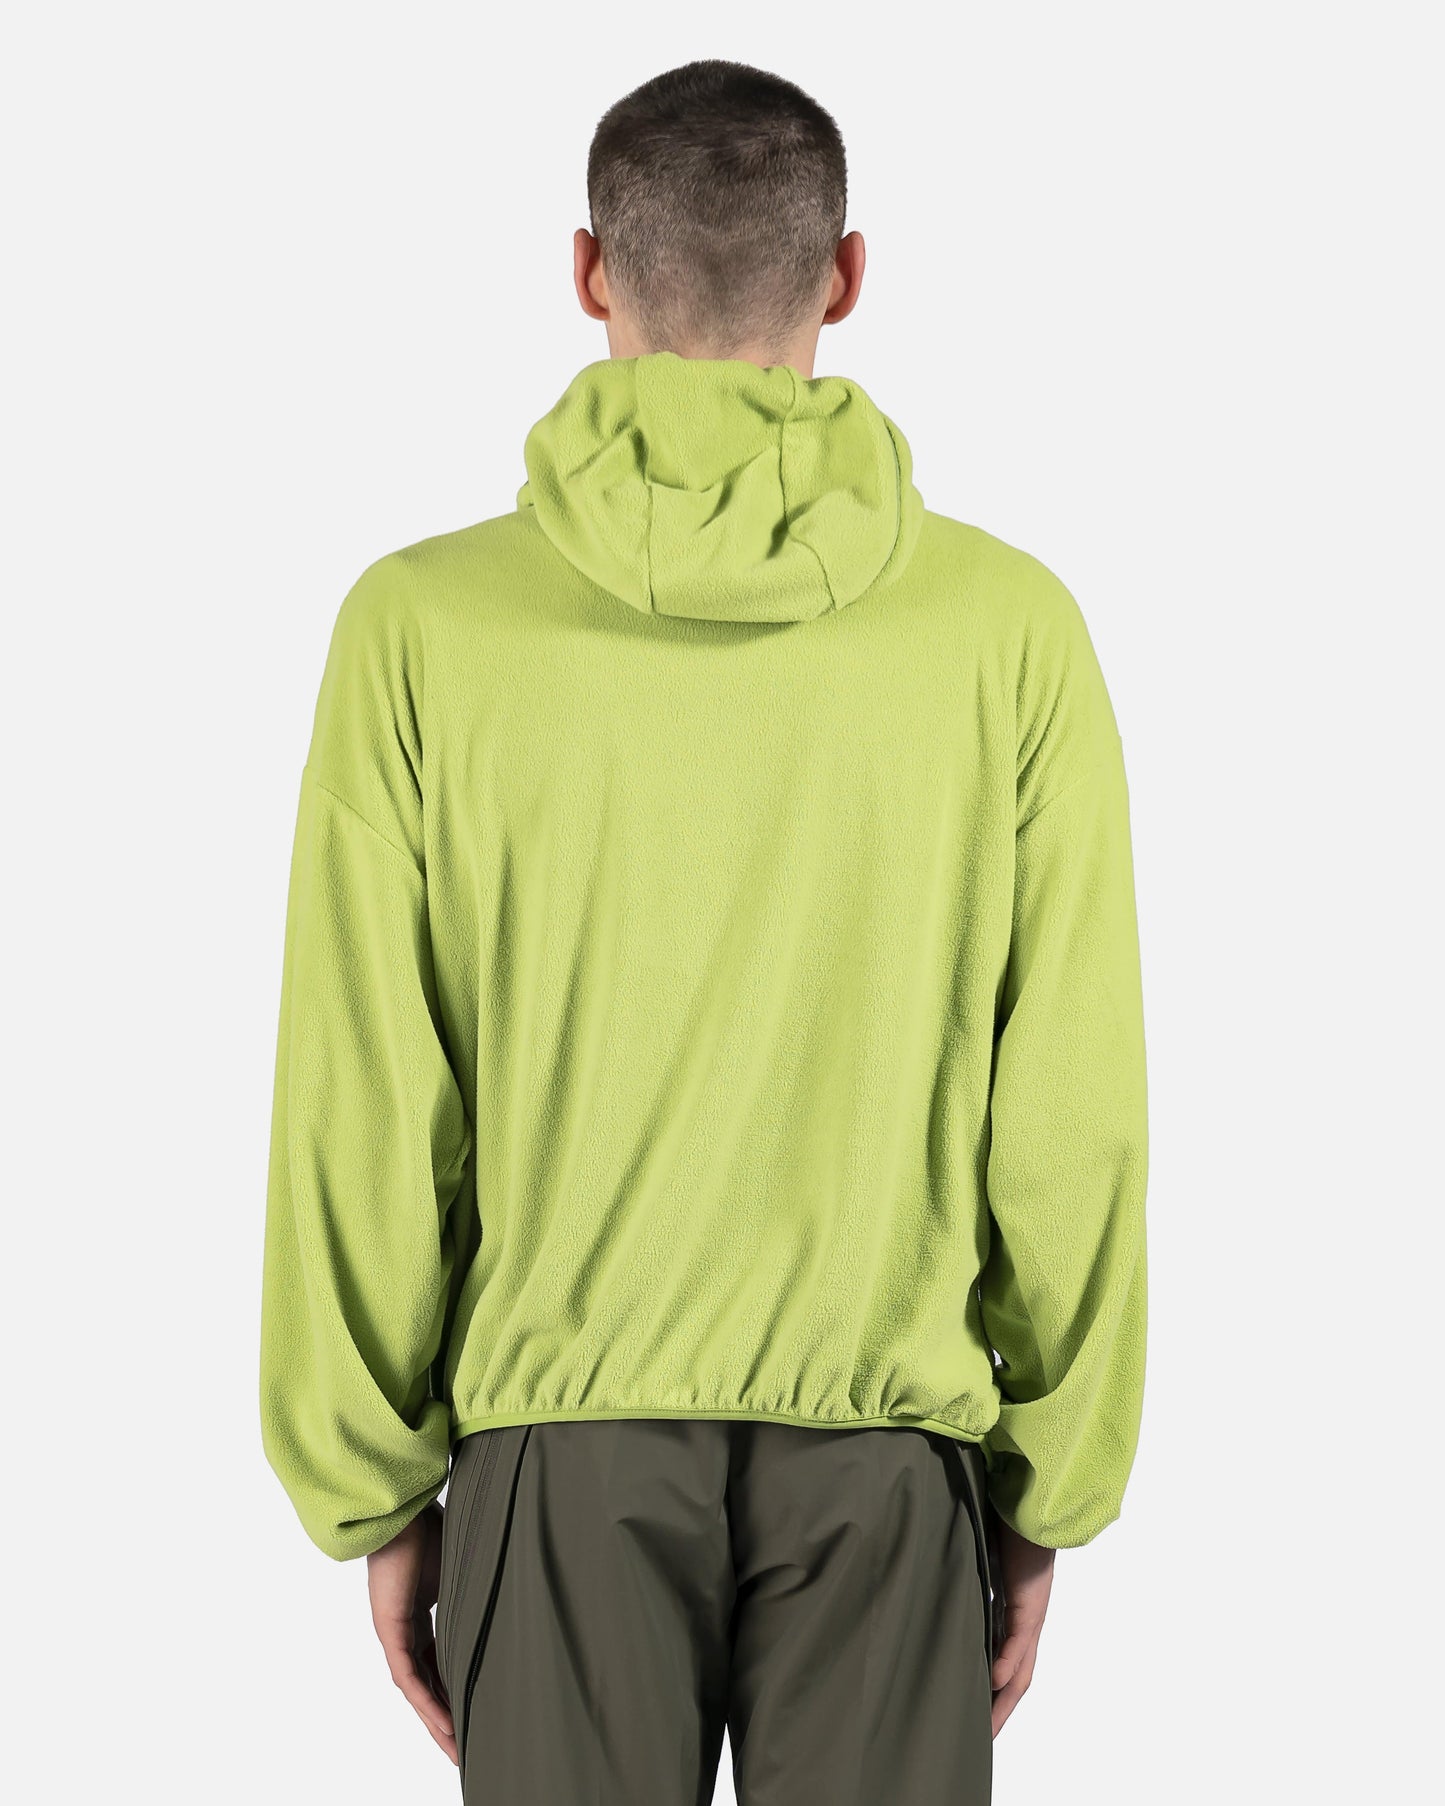 POST ARCHIVE FACTION (P.A.F) Men's Sweatshirts 4.0+ Hoodie Center in Neon Green